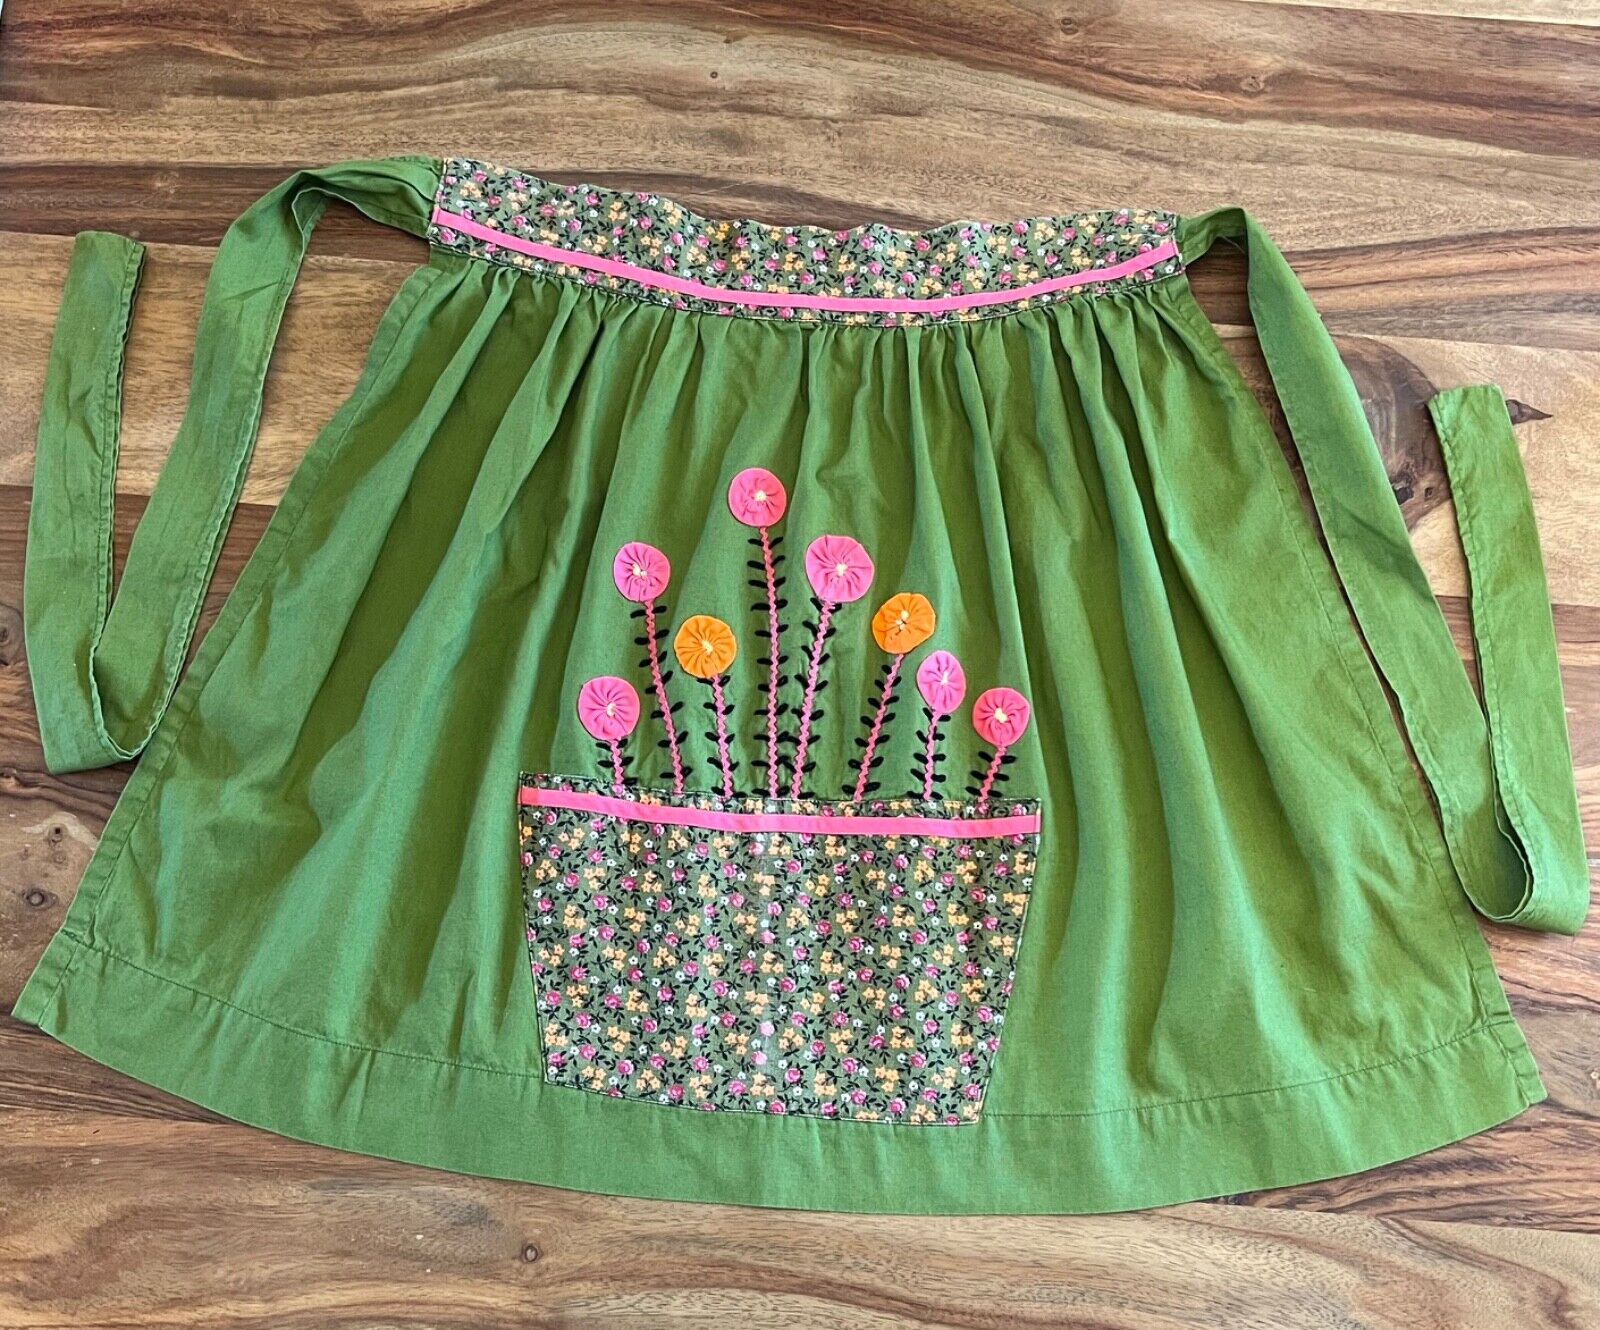 Vintage Cotton Half Apron with Pocket and Yoyo Flowers